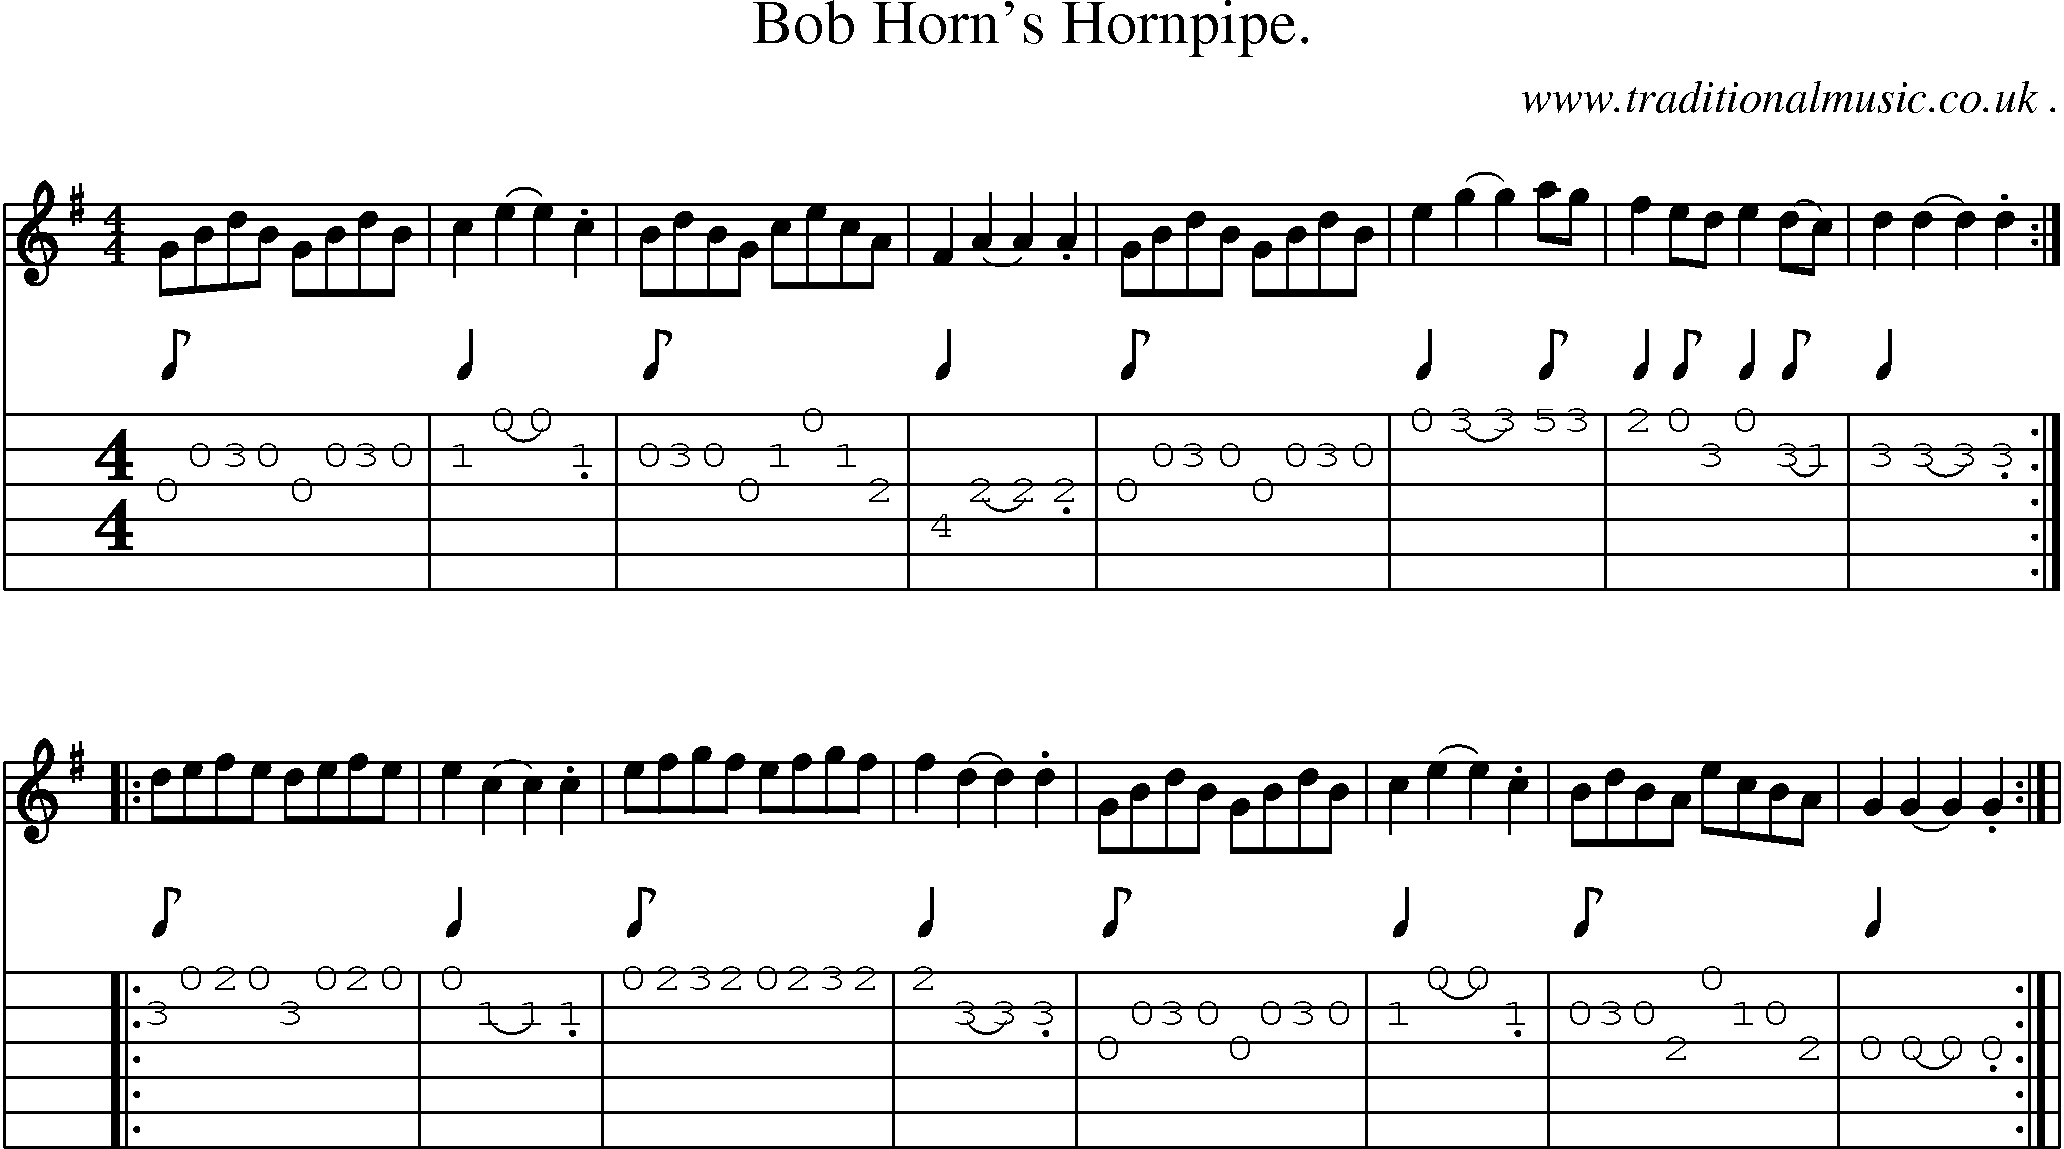 Sheet-Music and Guitar Tabs for Bob Horns Hornpipe